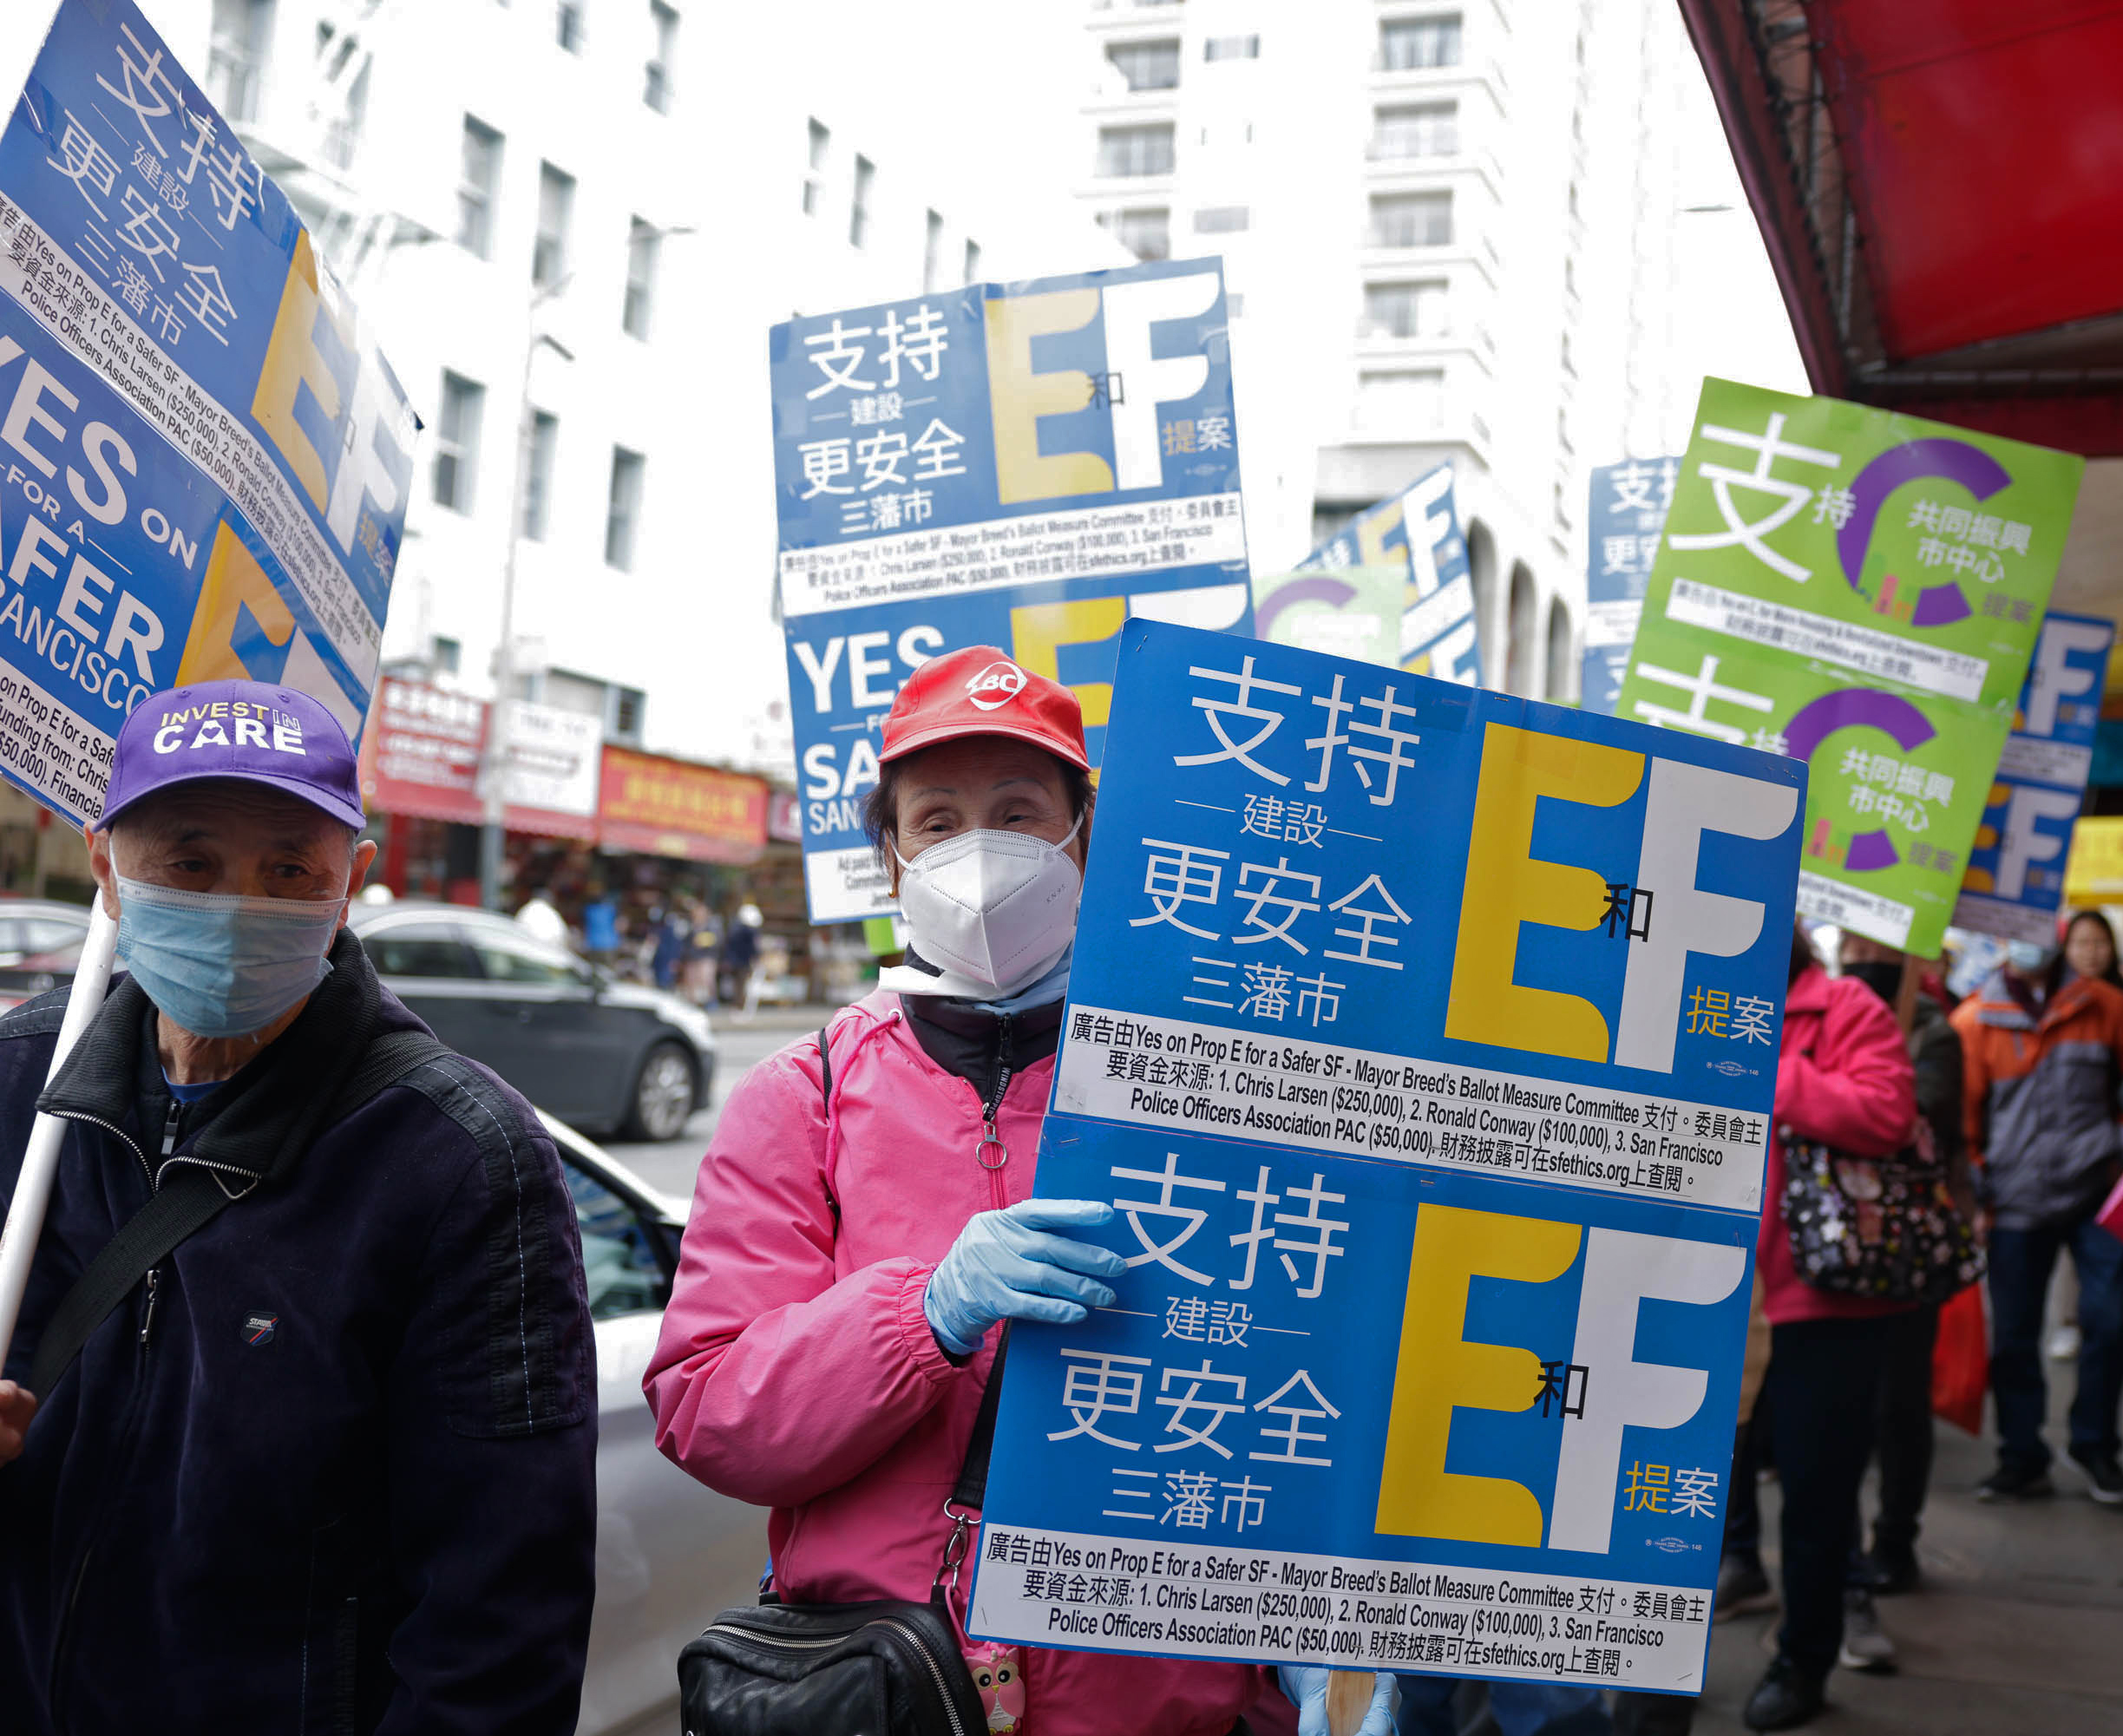 People are holding blue and green signs with &quot;EF&quot; in a city street, advocating for a proposition, wearing masks and gloves.